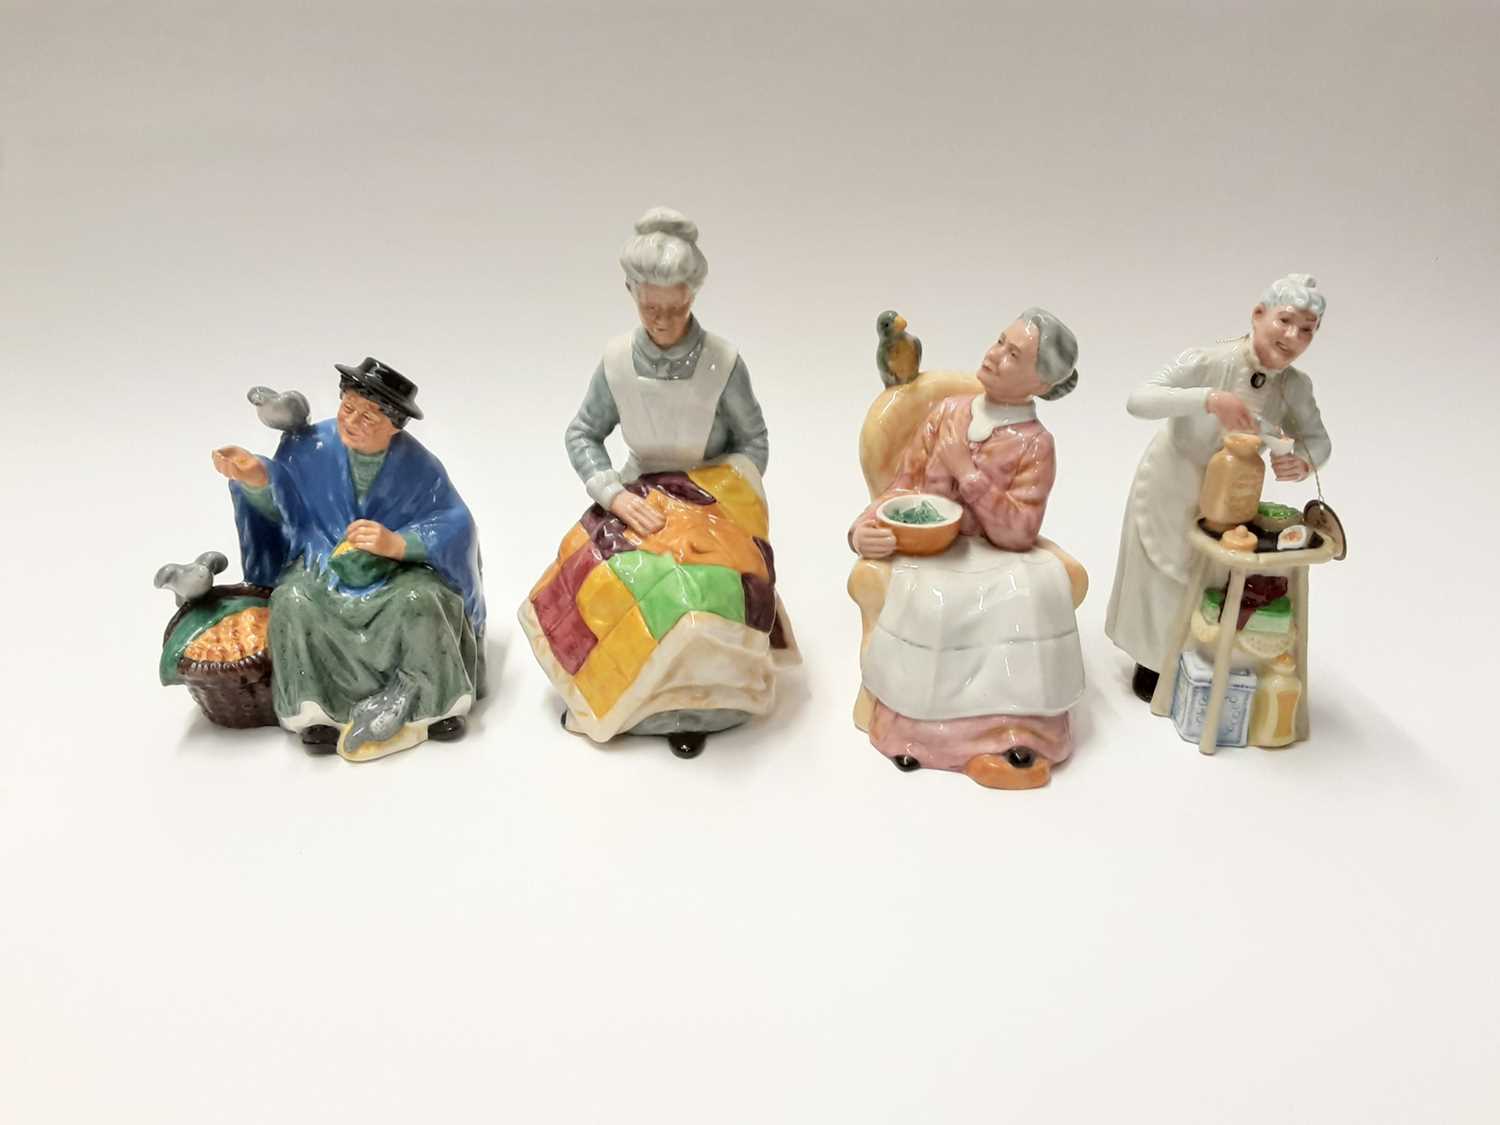 Lot 69 - Four Royal Doulton figures - Eventide HN2814, Tuppence A Bag HN2320, A Penny's Worth HN2408 and Pretty Polly HN2768